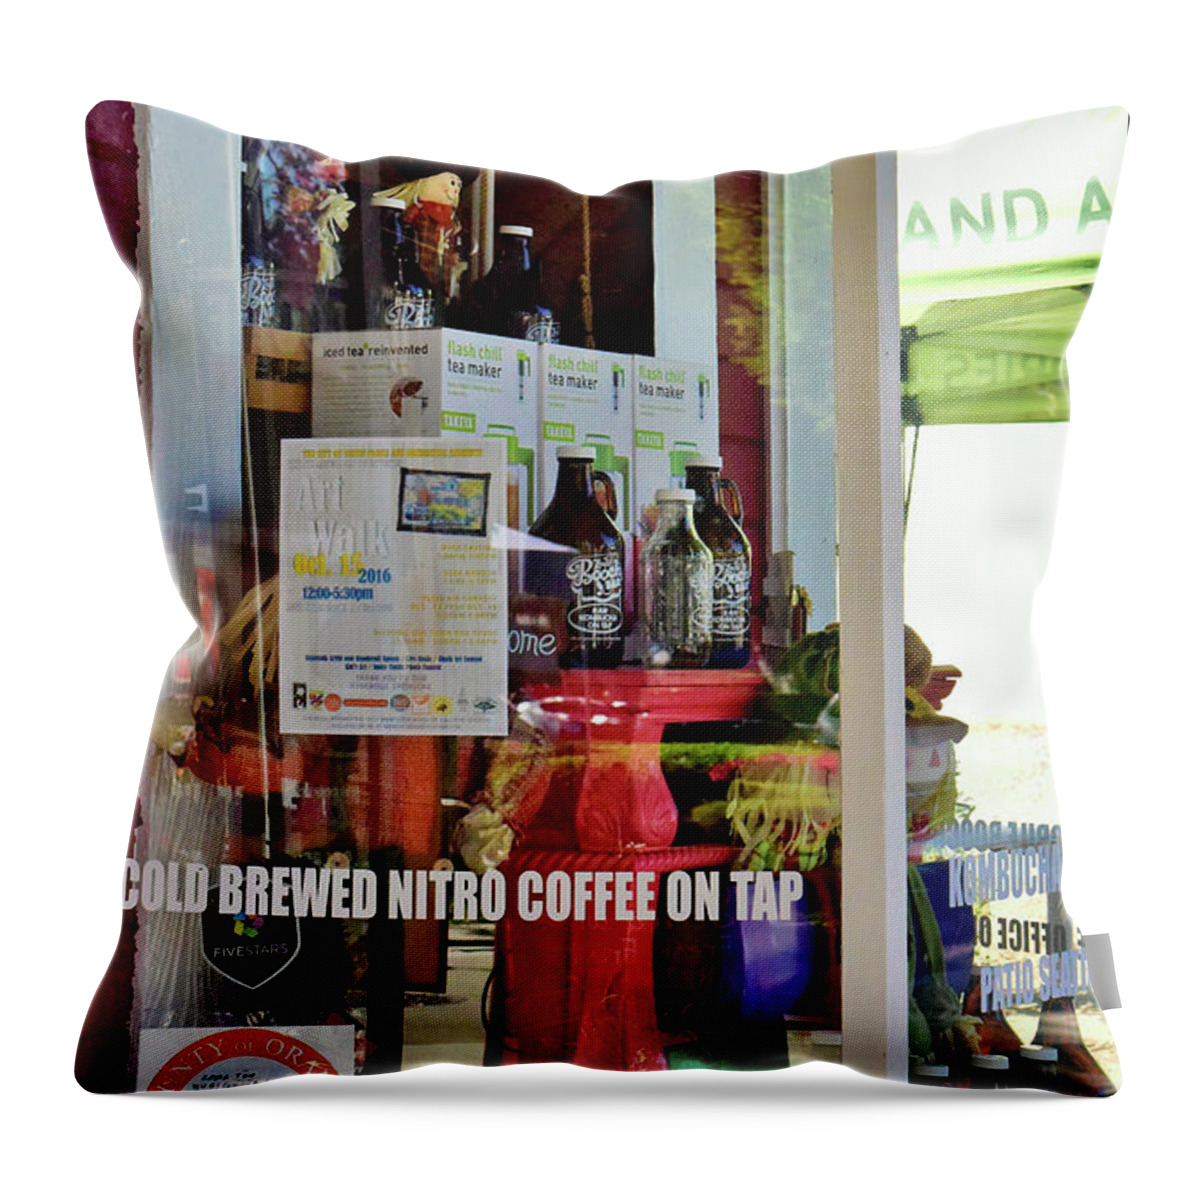 Linda Brody Throw Pillow featuring the photograph Nitro Coffee On Tap by Linda Brody